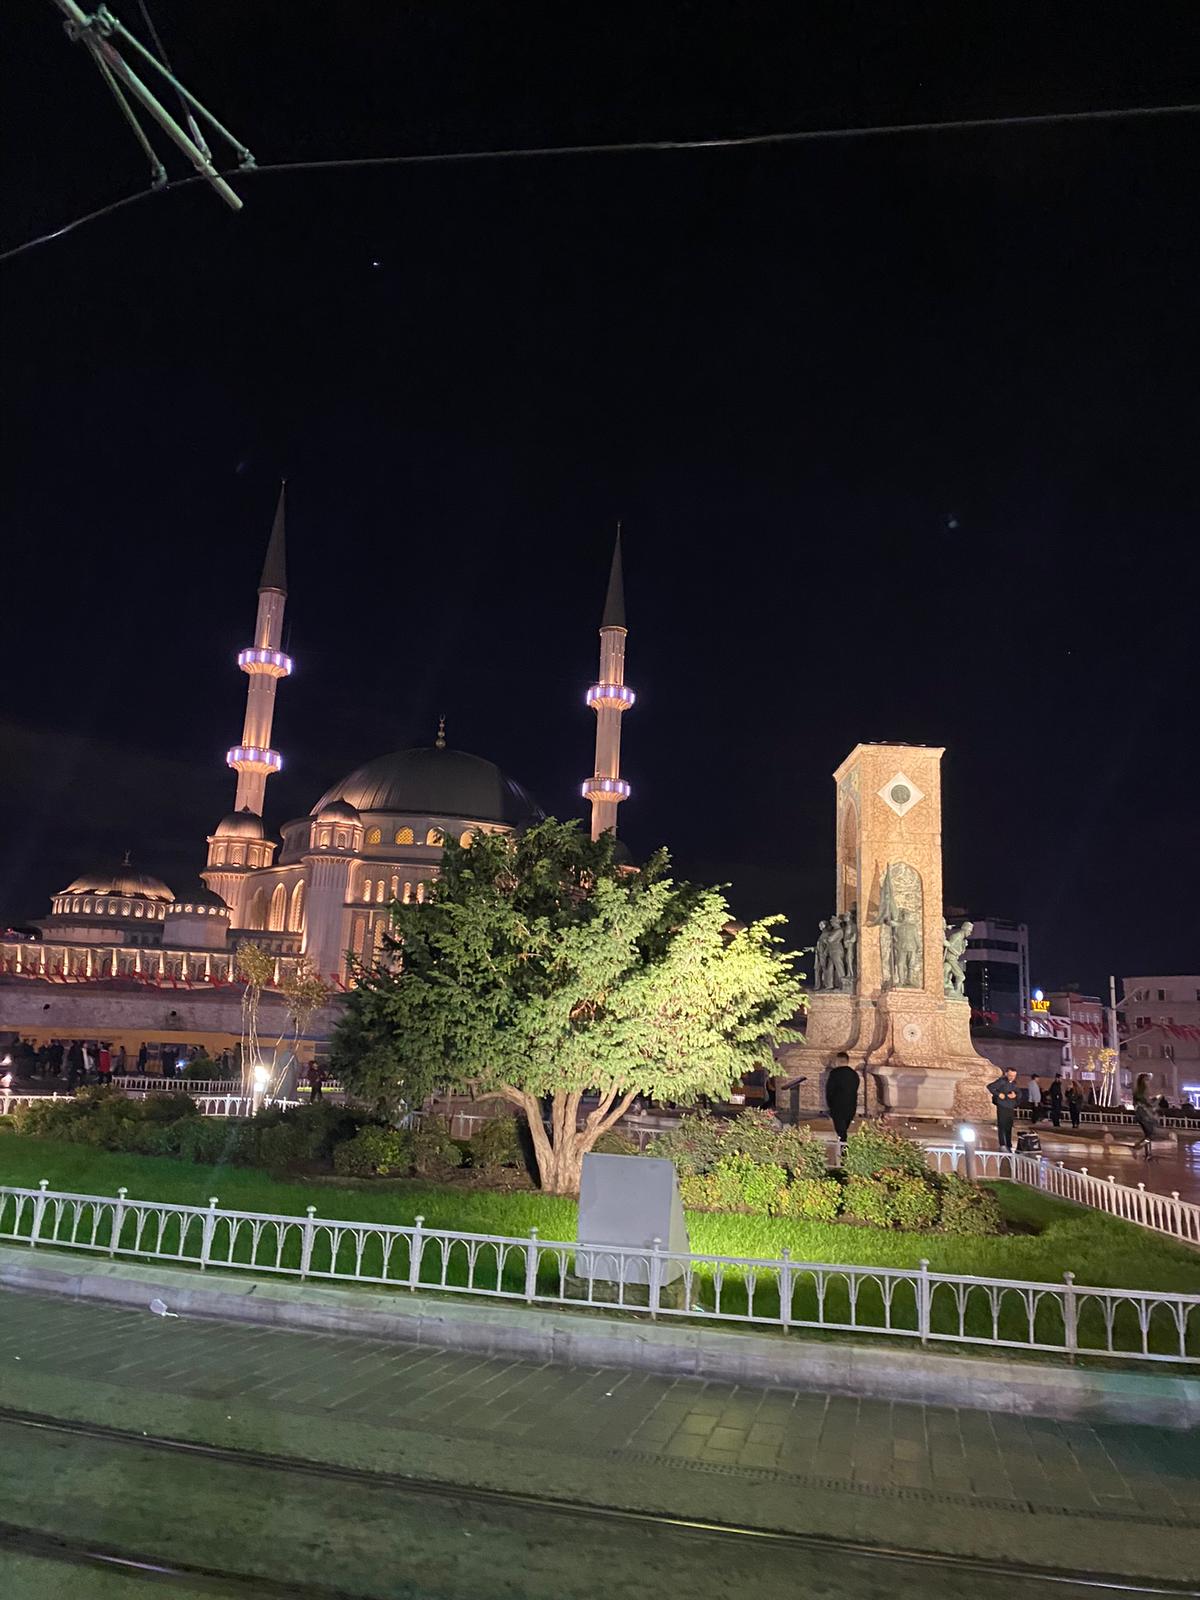 Key Features of Taksim Square